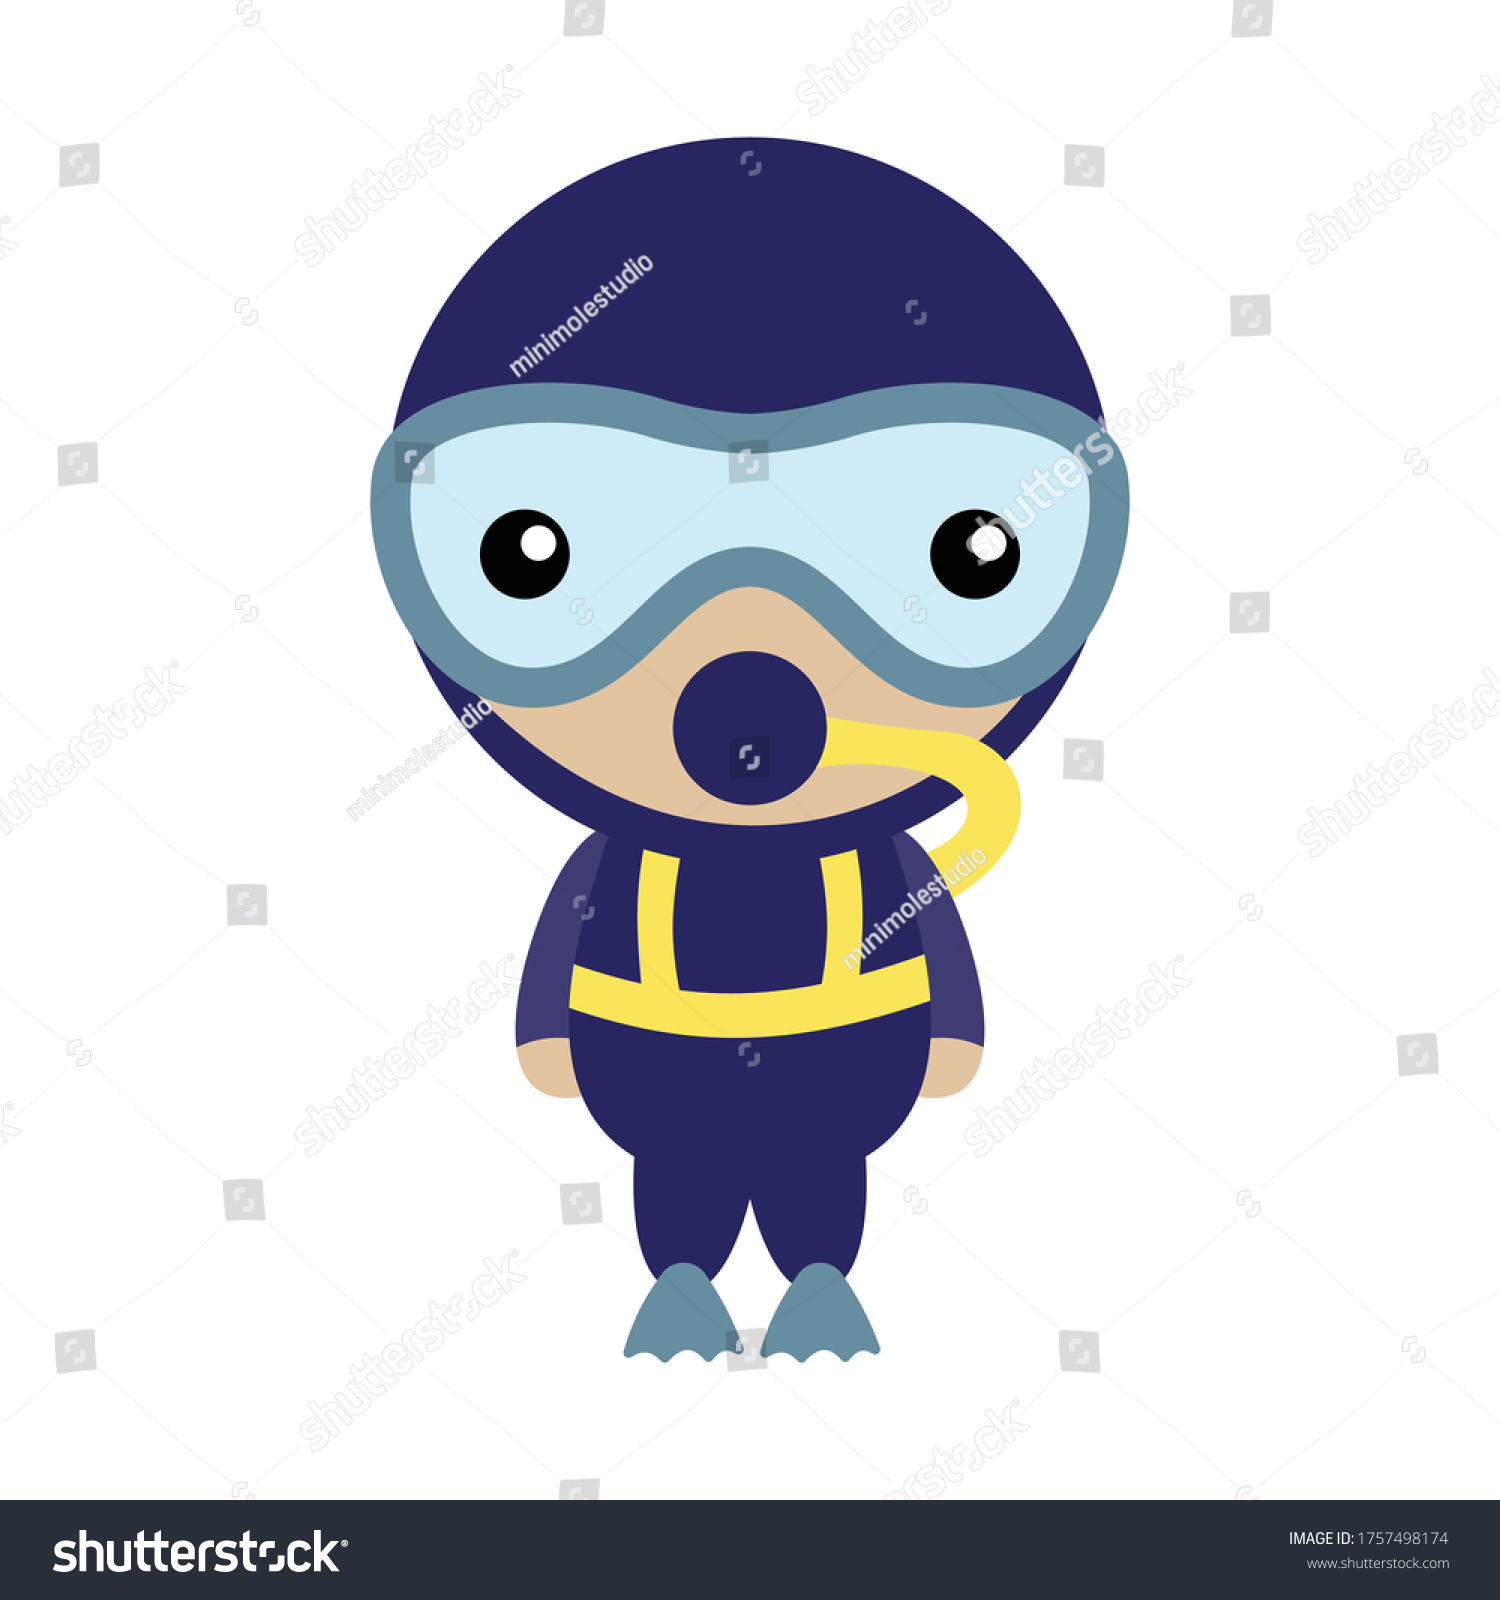 SVG of Vector illustration of a deep sea diver. Simple, flat kawaii style. svg